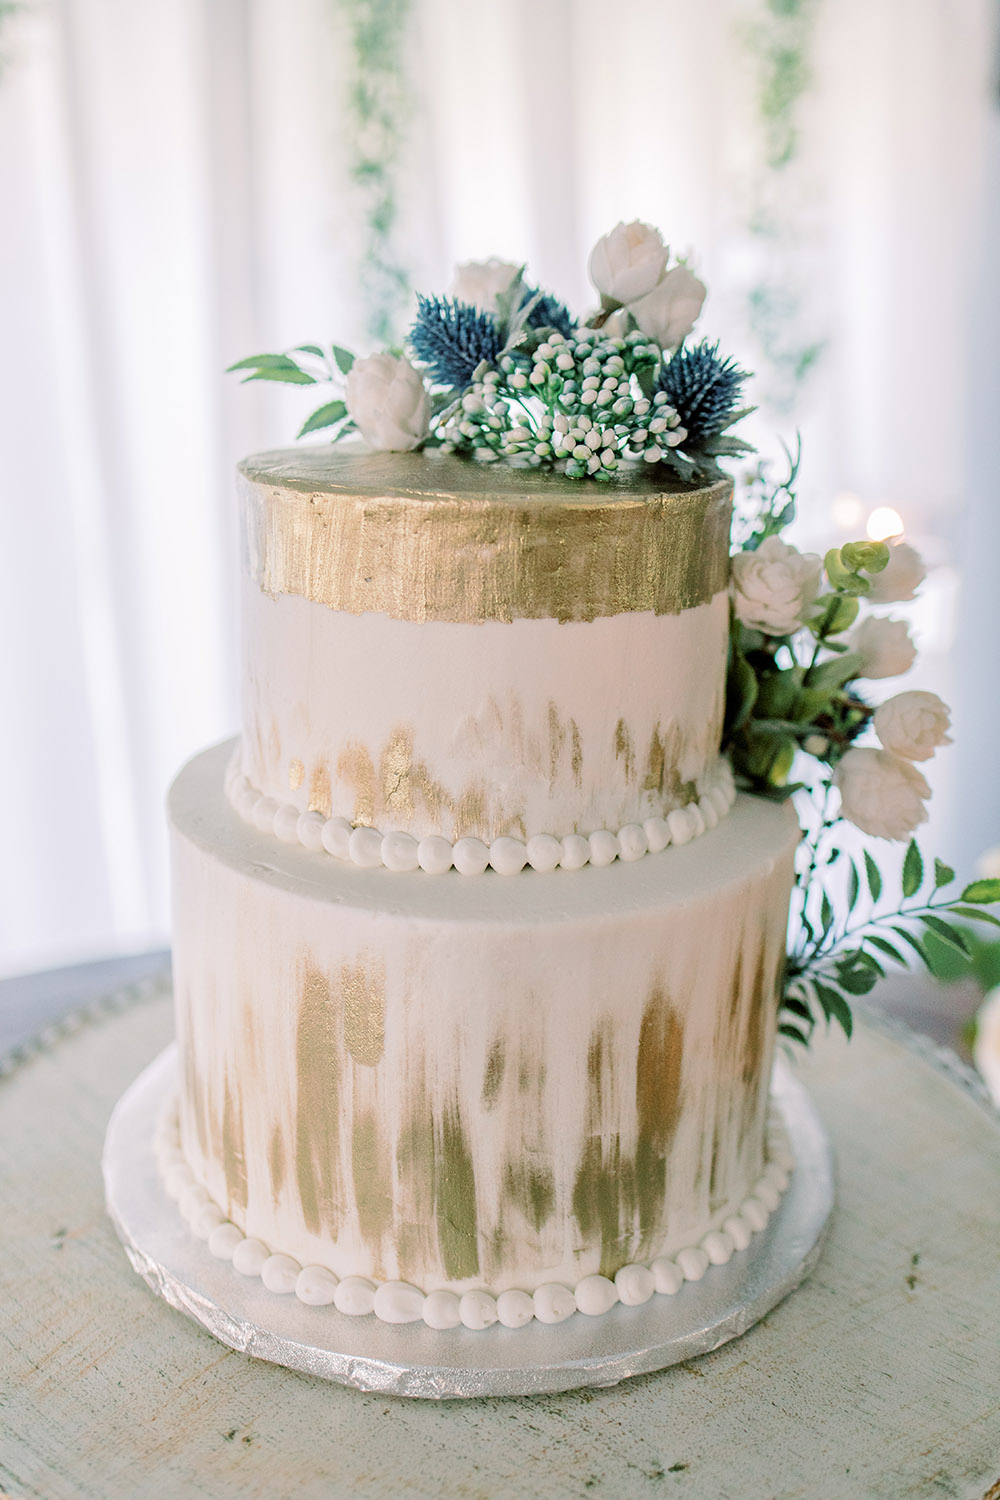 Detail of the Wedding Cake. A two-tier ivory cake with gold accents and fresh flowers and greenery. Photo: Ashley Kristen Photography